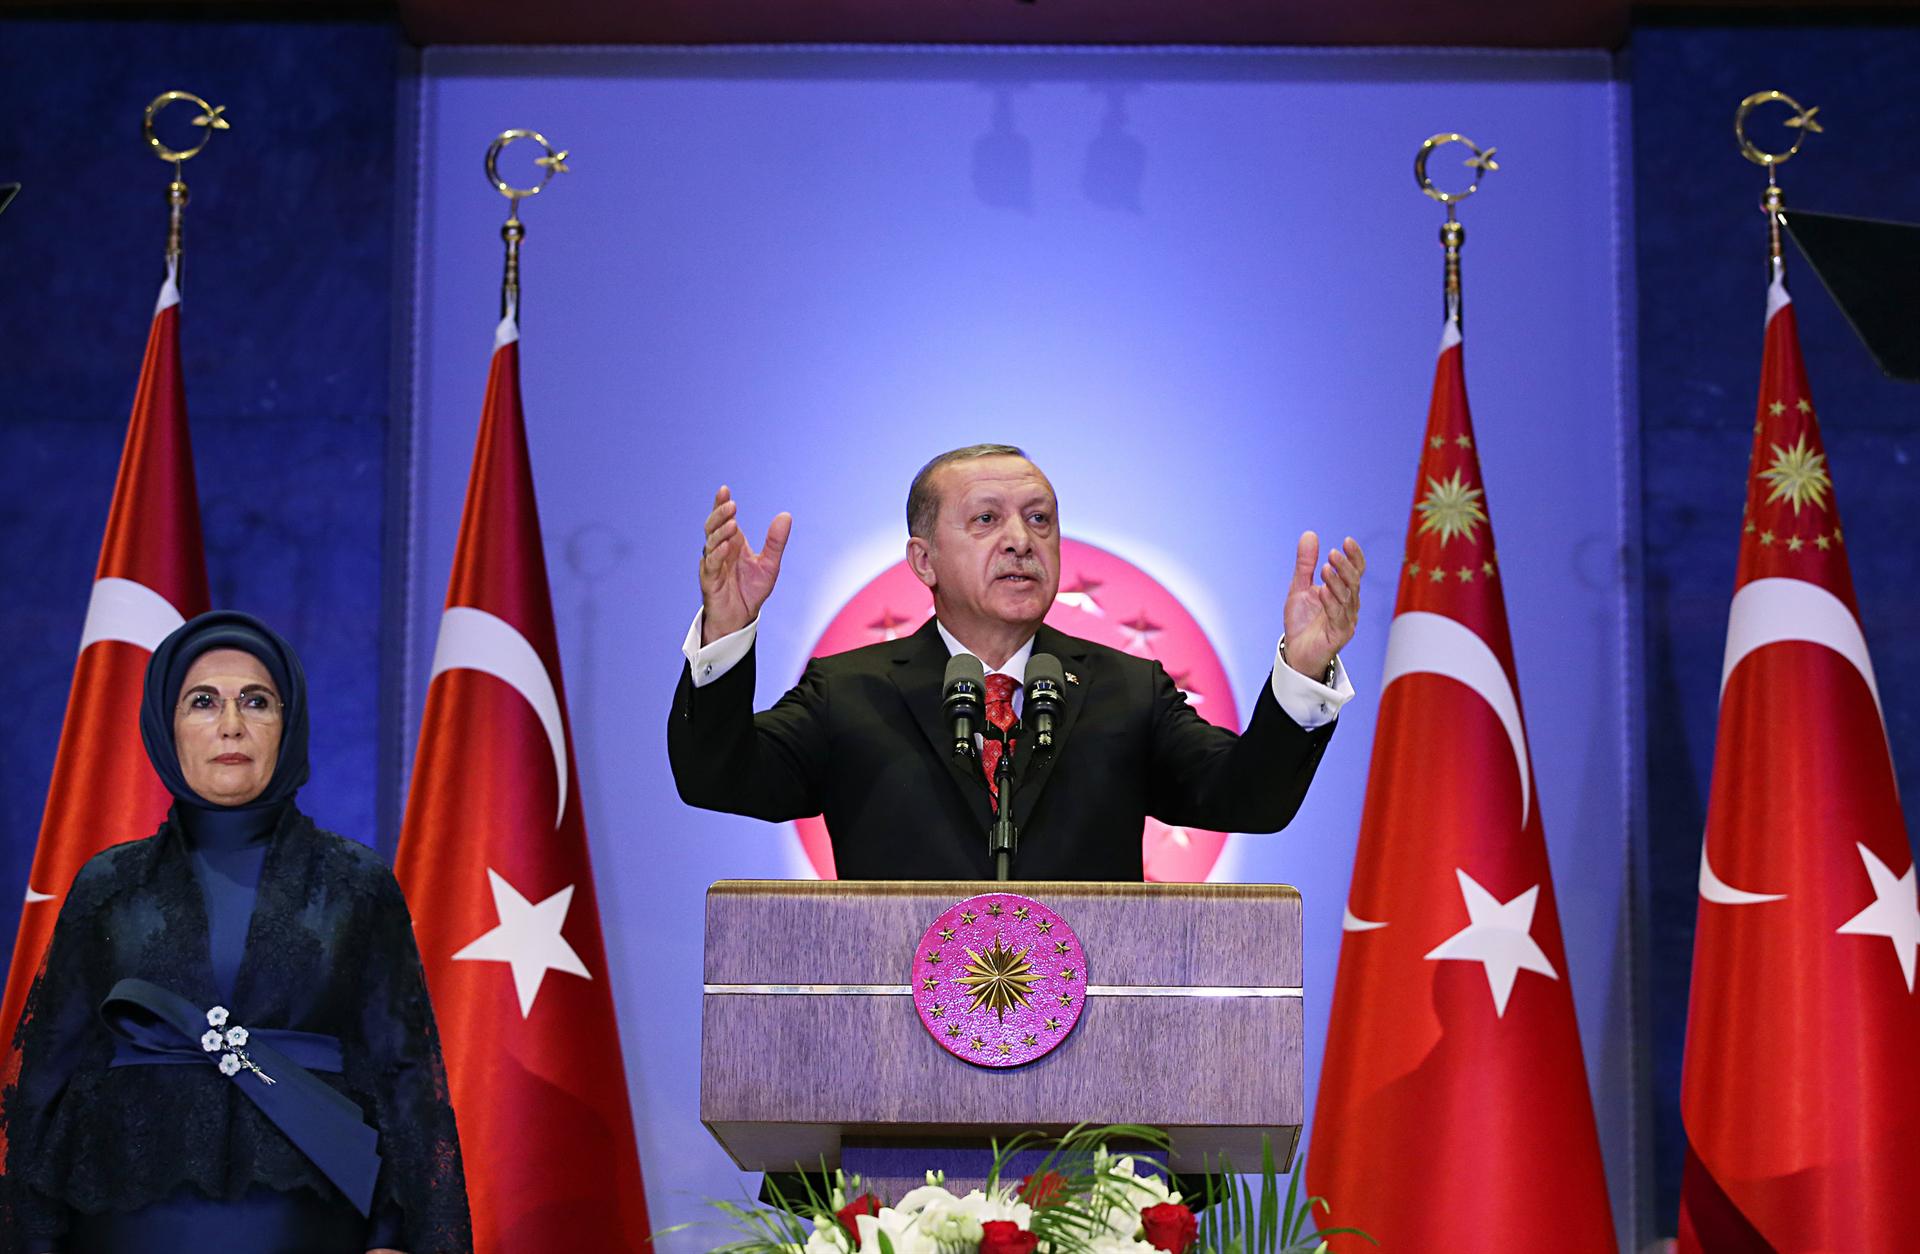 Turkey will ‘spoil games’ with force if necessary, Erdoğan says at Republic Day reception